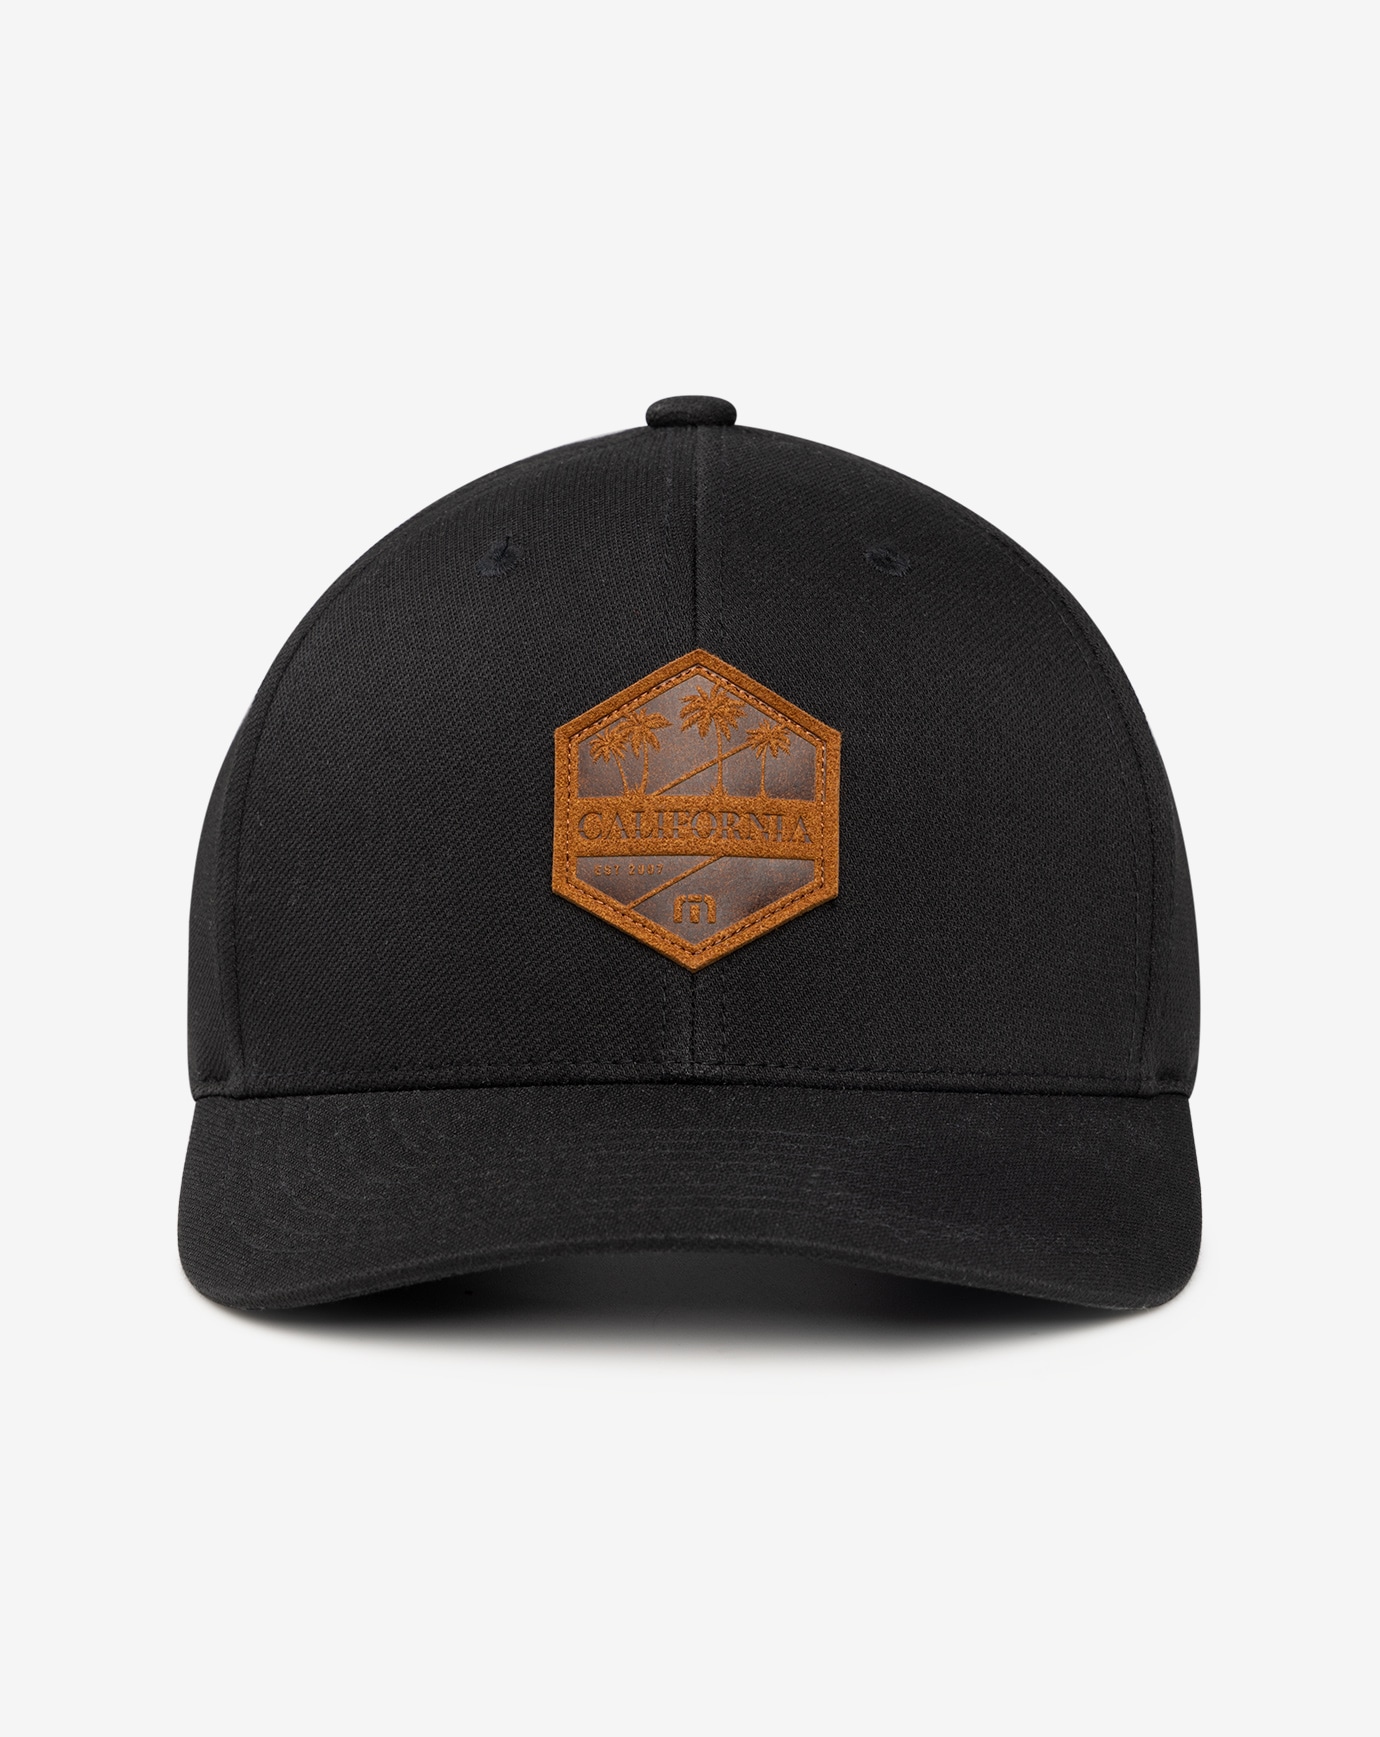 Related Product - KIRBY COVE SNAPBACK HAT